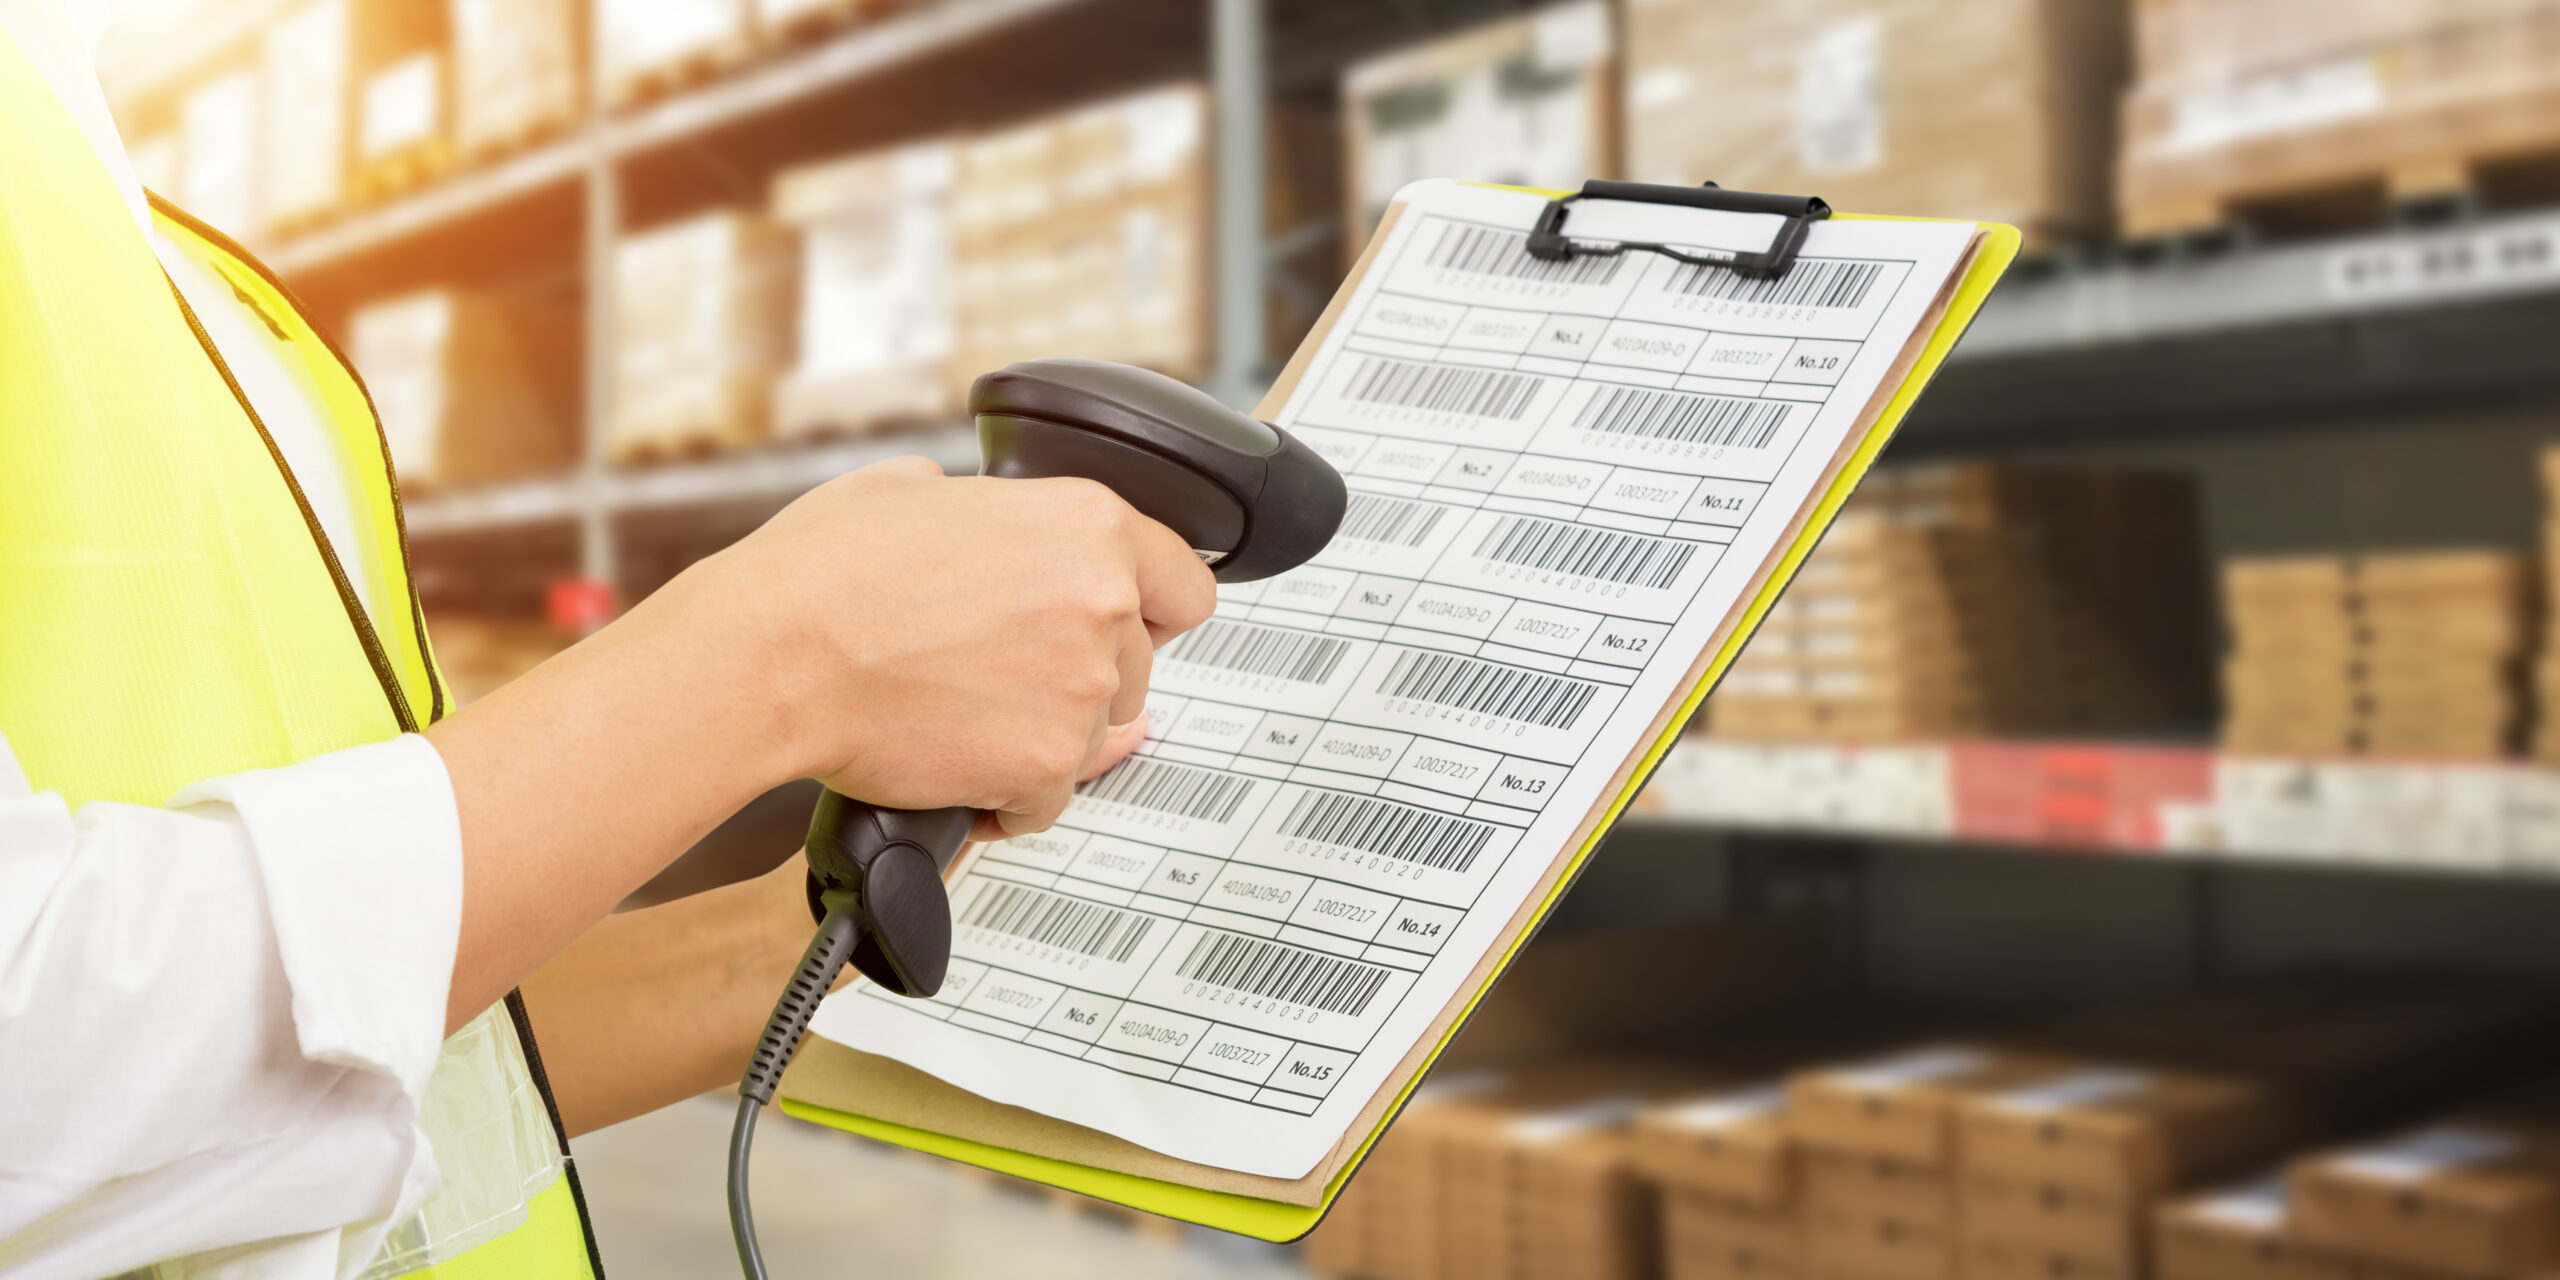 How To Read a Barcode: Top 4 Essential Technologies